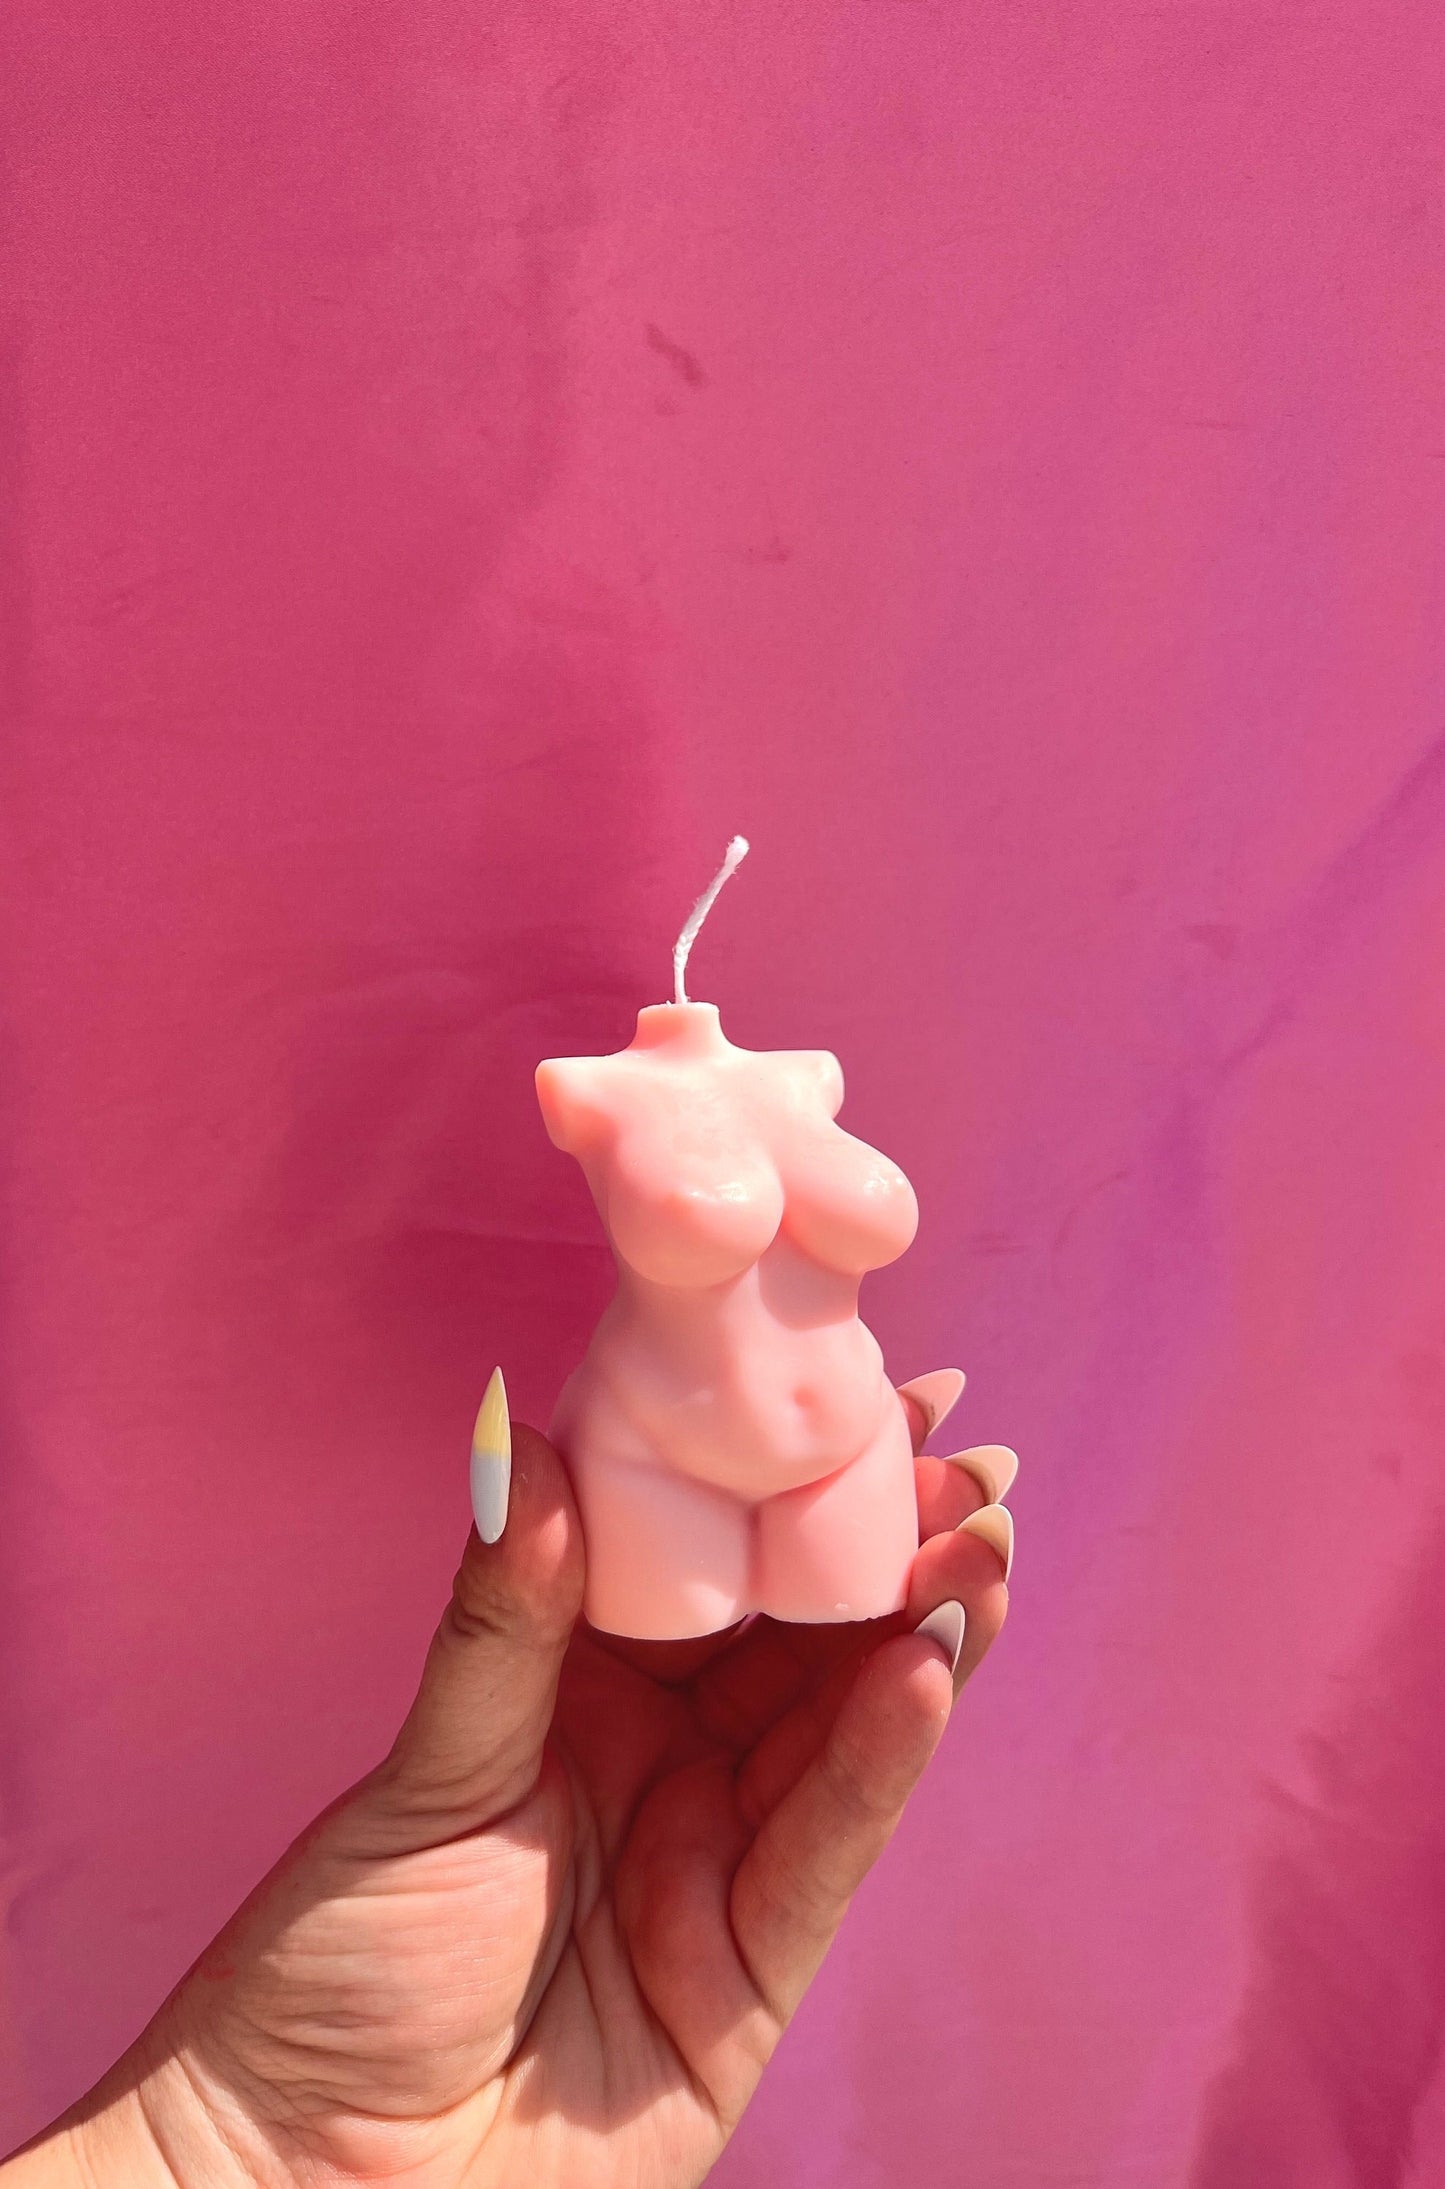 Goddess - Small - Curvy Female Form Nude/Naked Body Aesthetic Candle